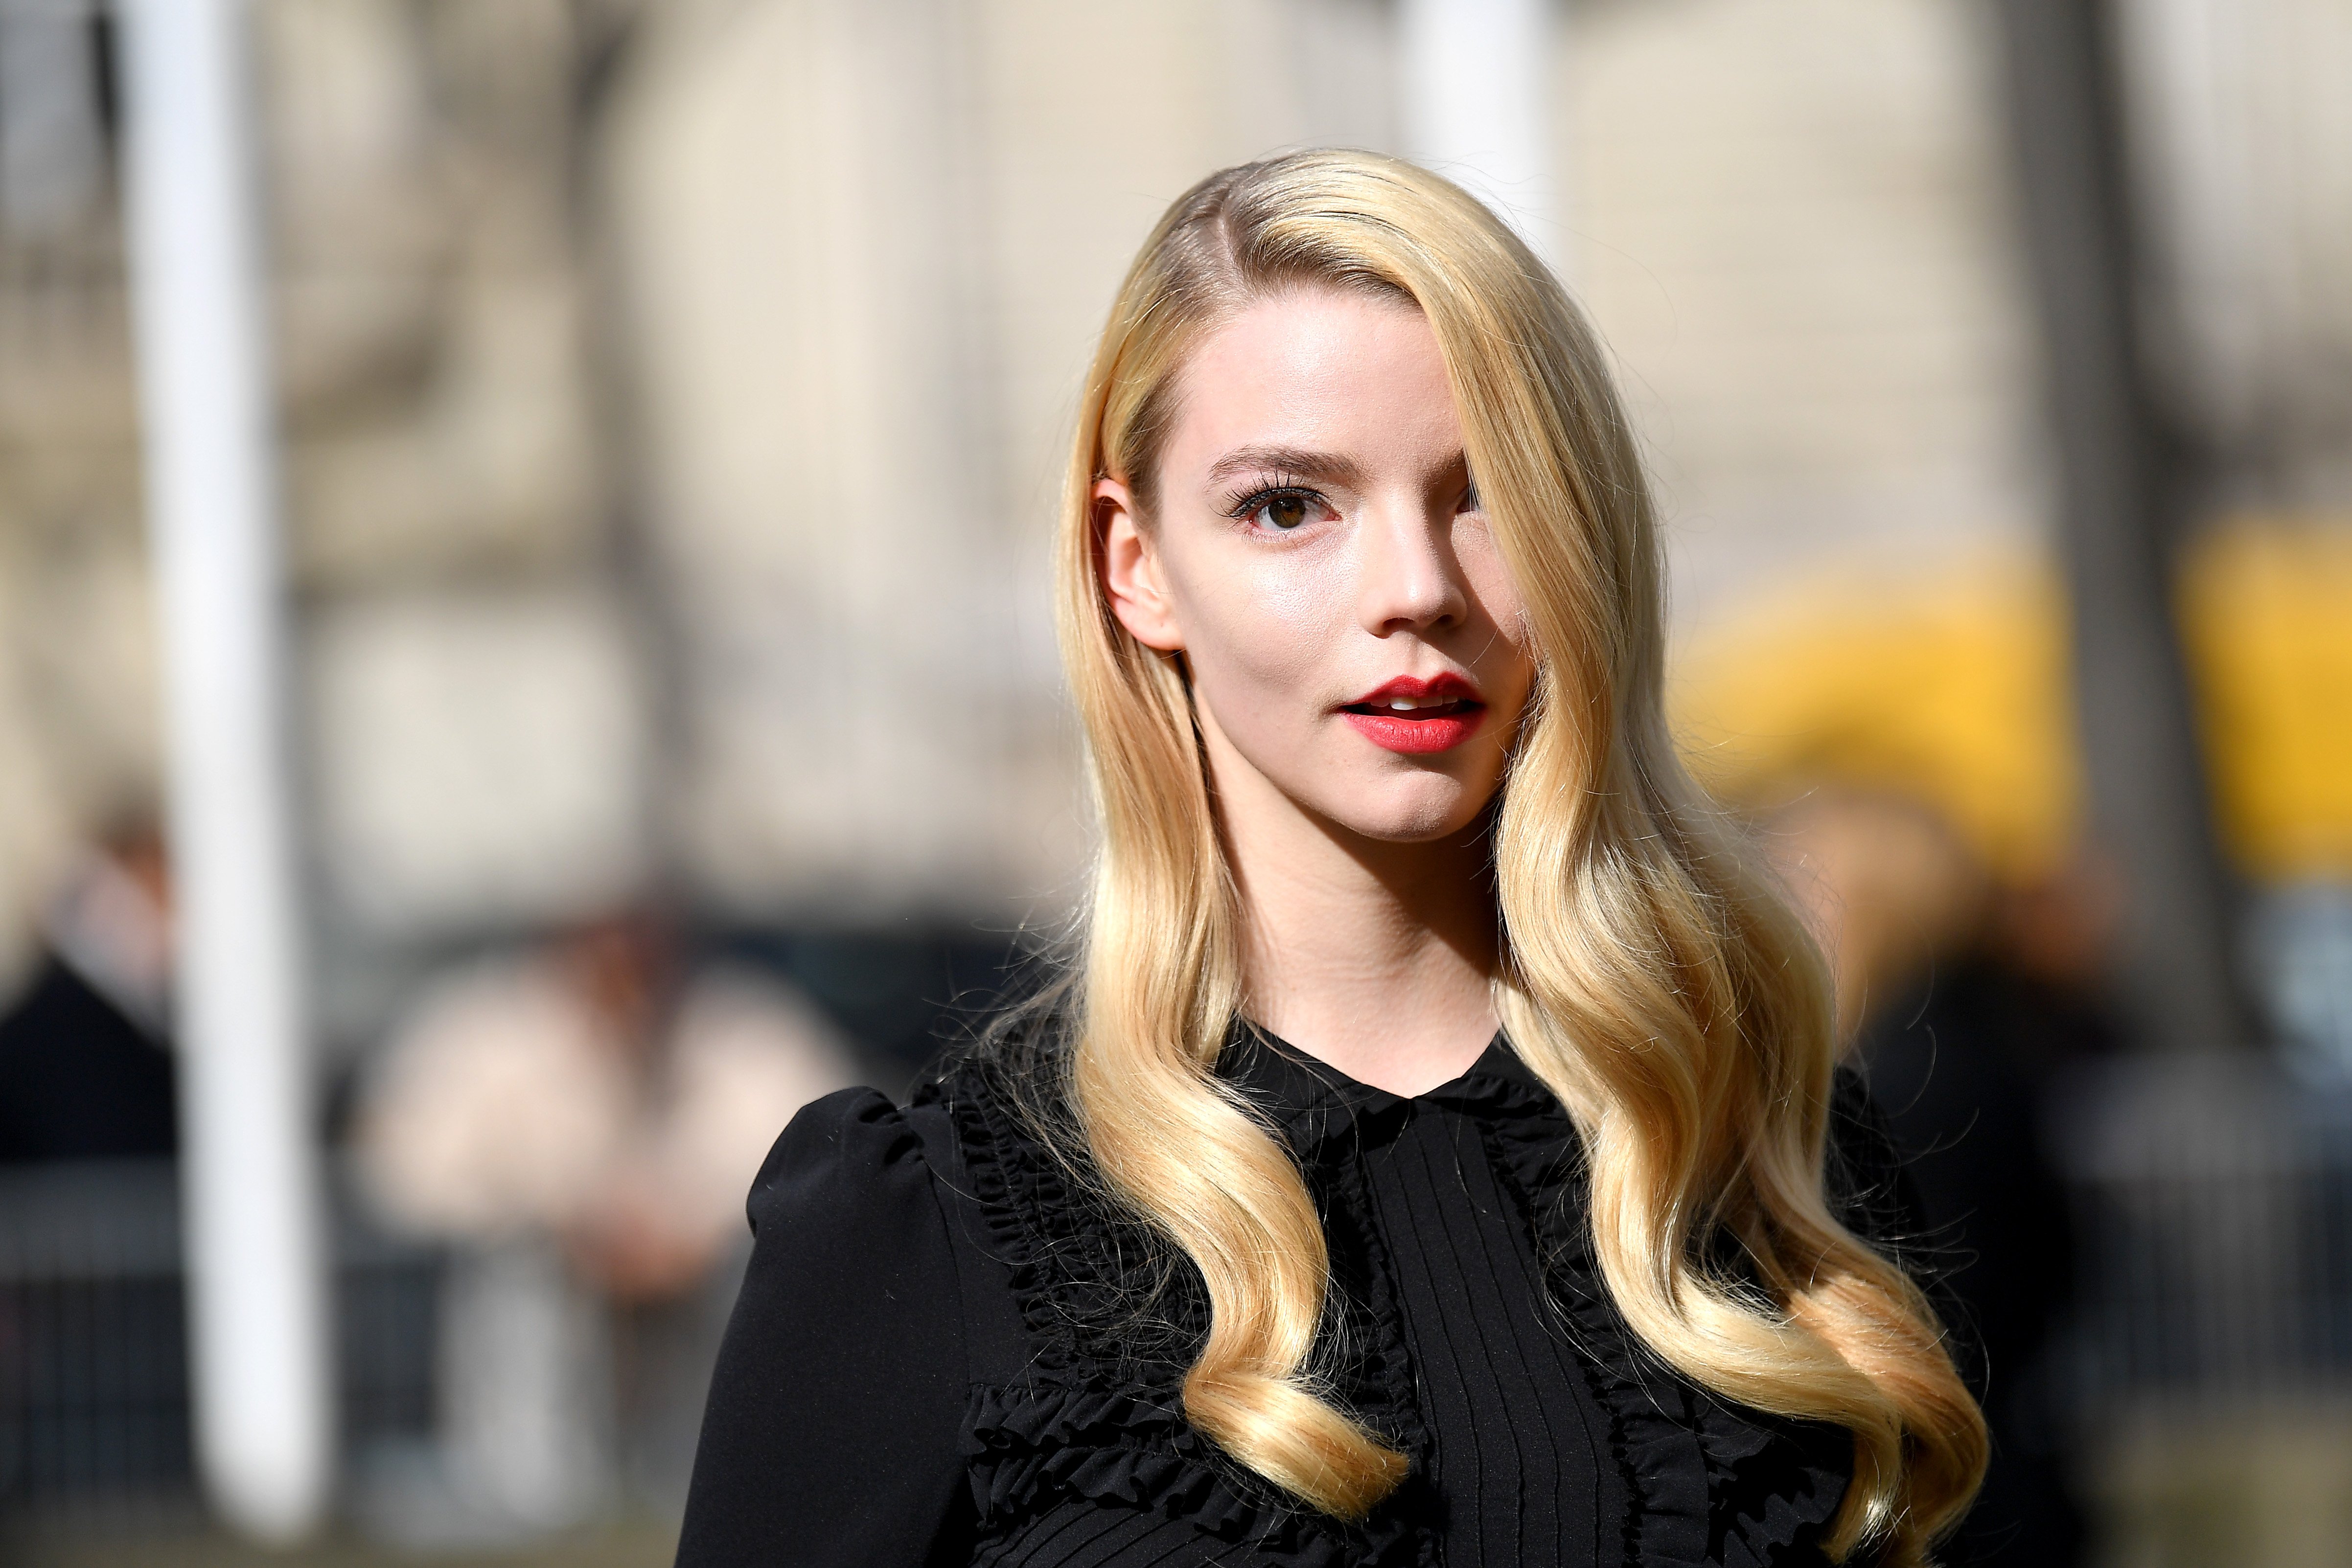 Anya Taylor-Joy in a black shirt with long blonde hair covering one eye.